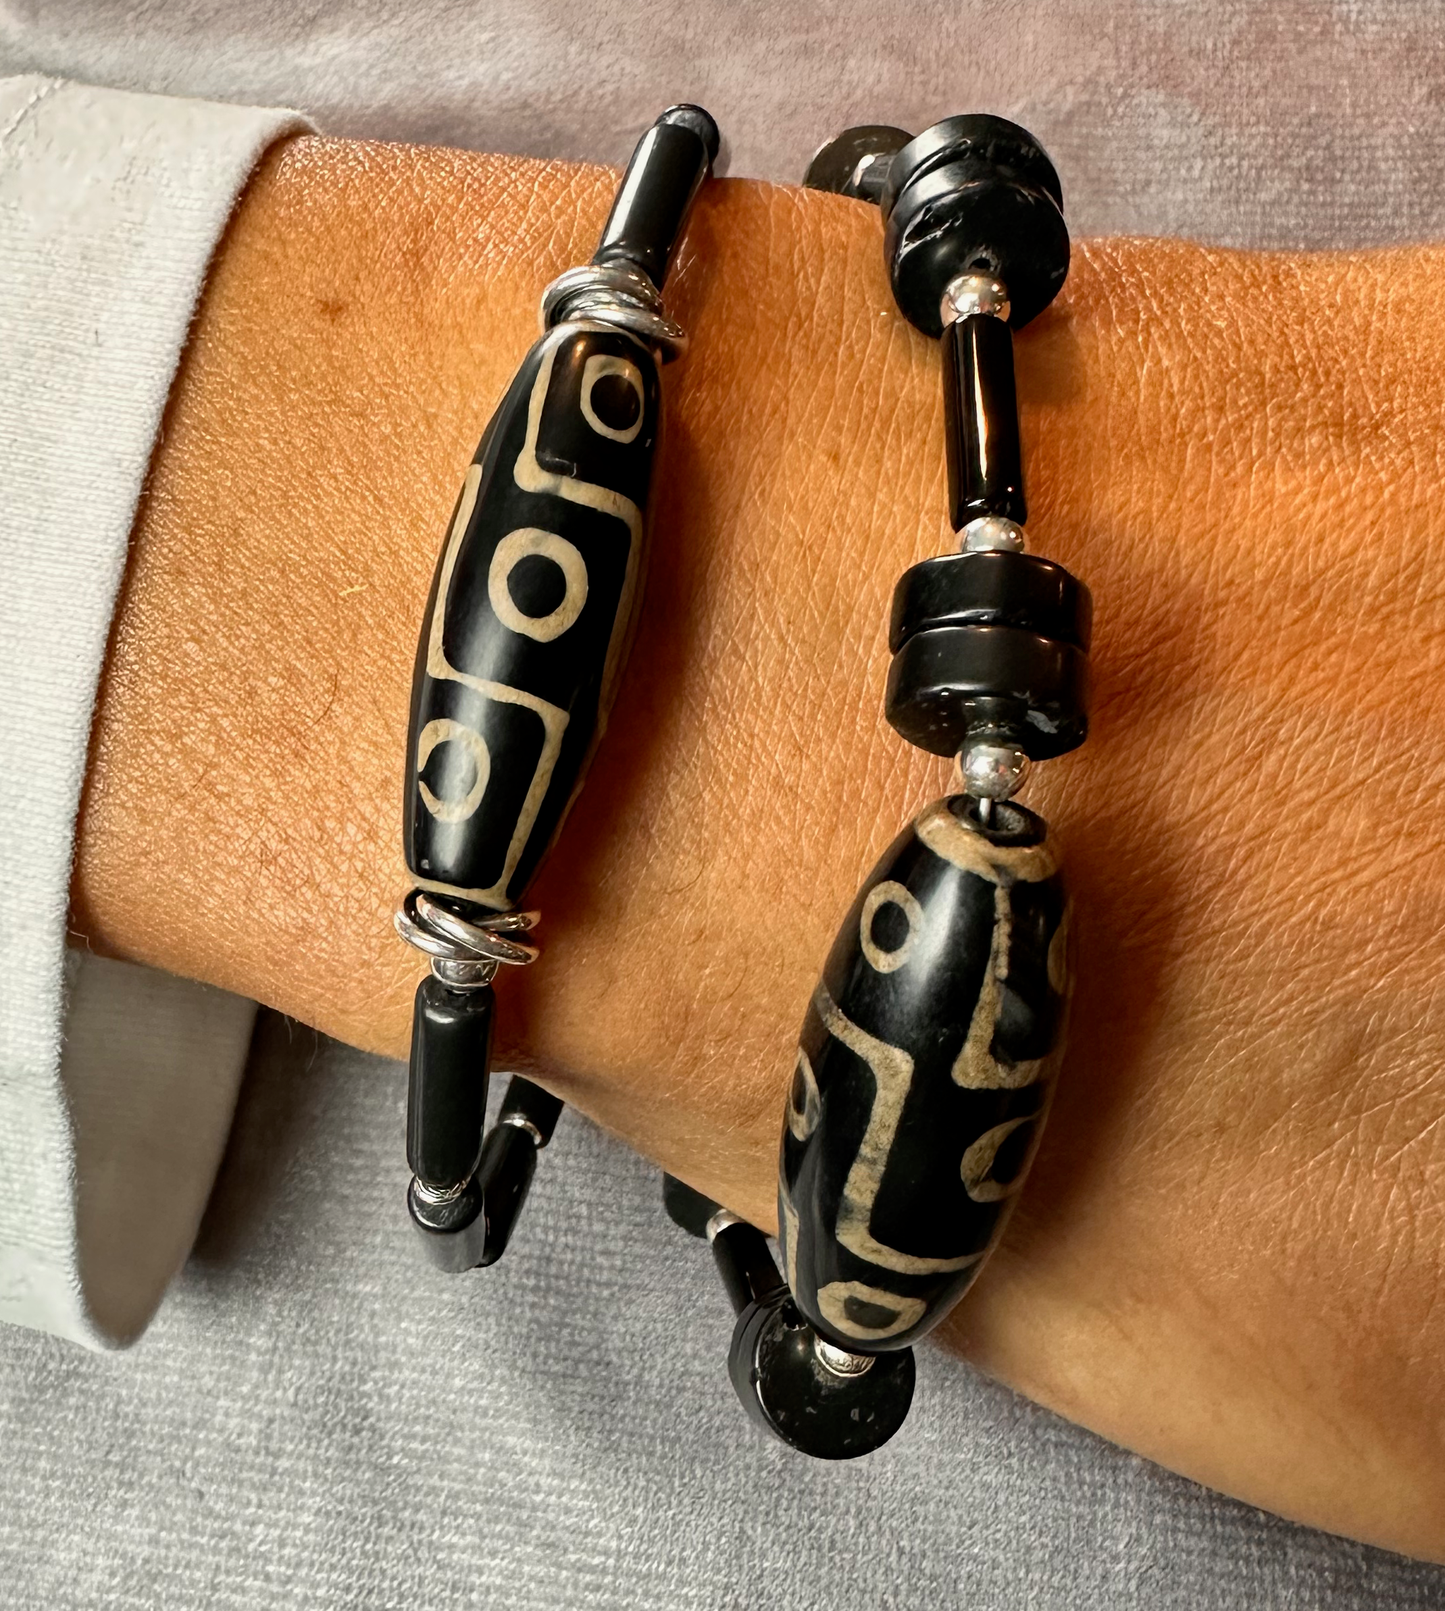 Tibetan Focal Bead Bracelet with Black Jasper and Sterling Silver Accent Beads